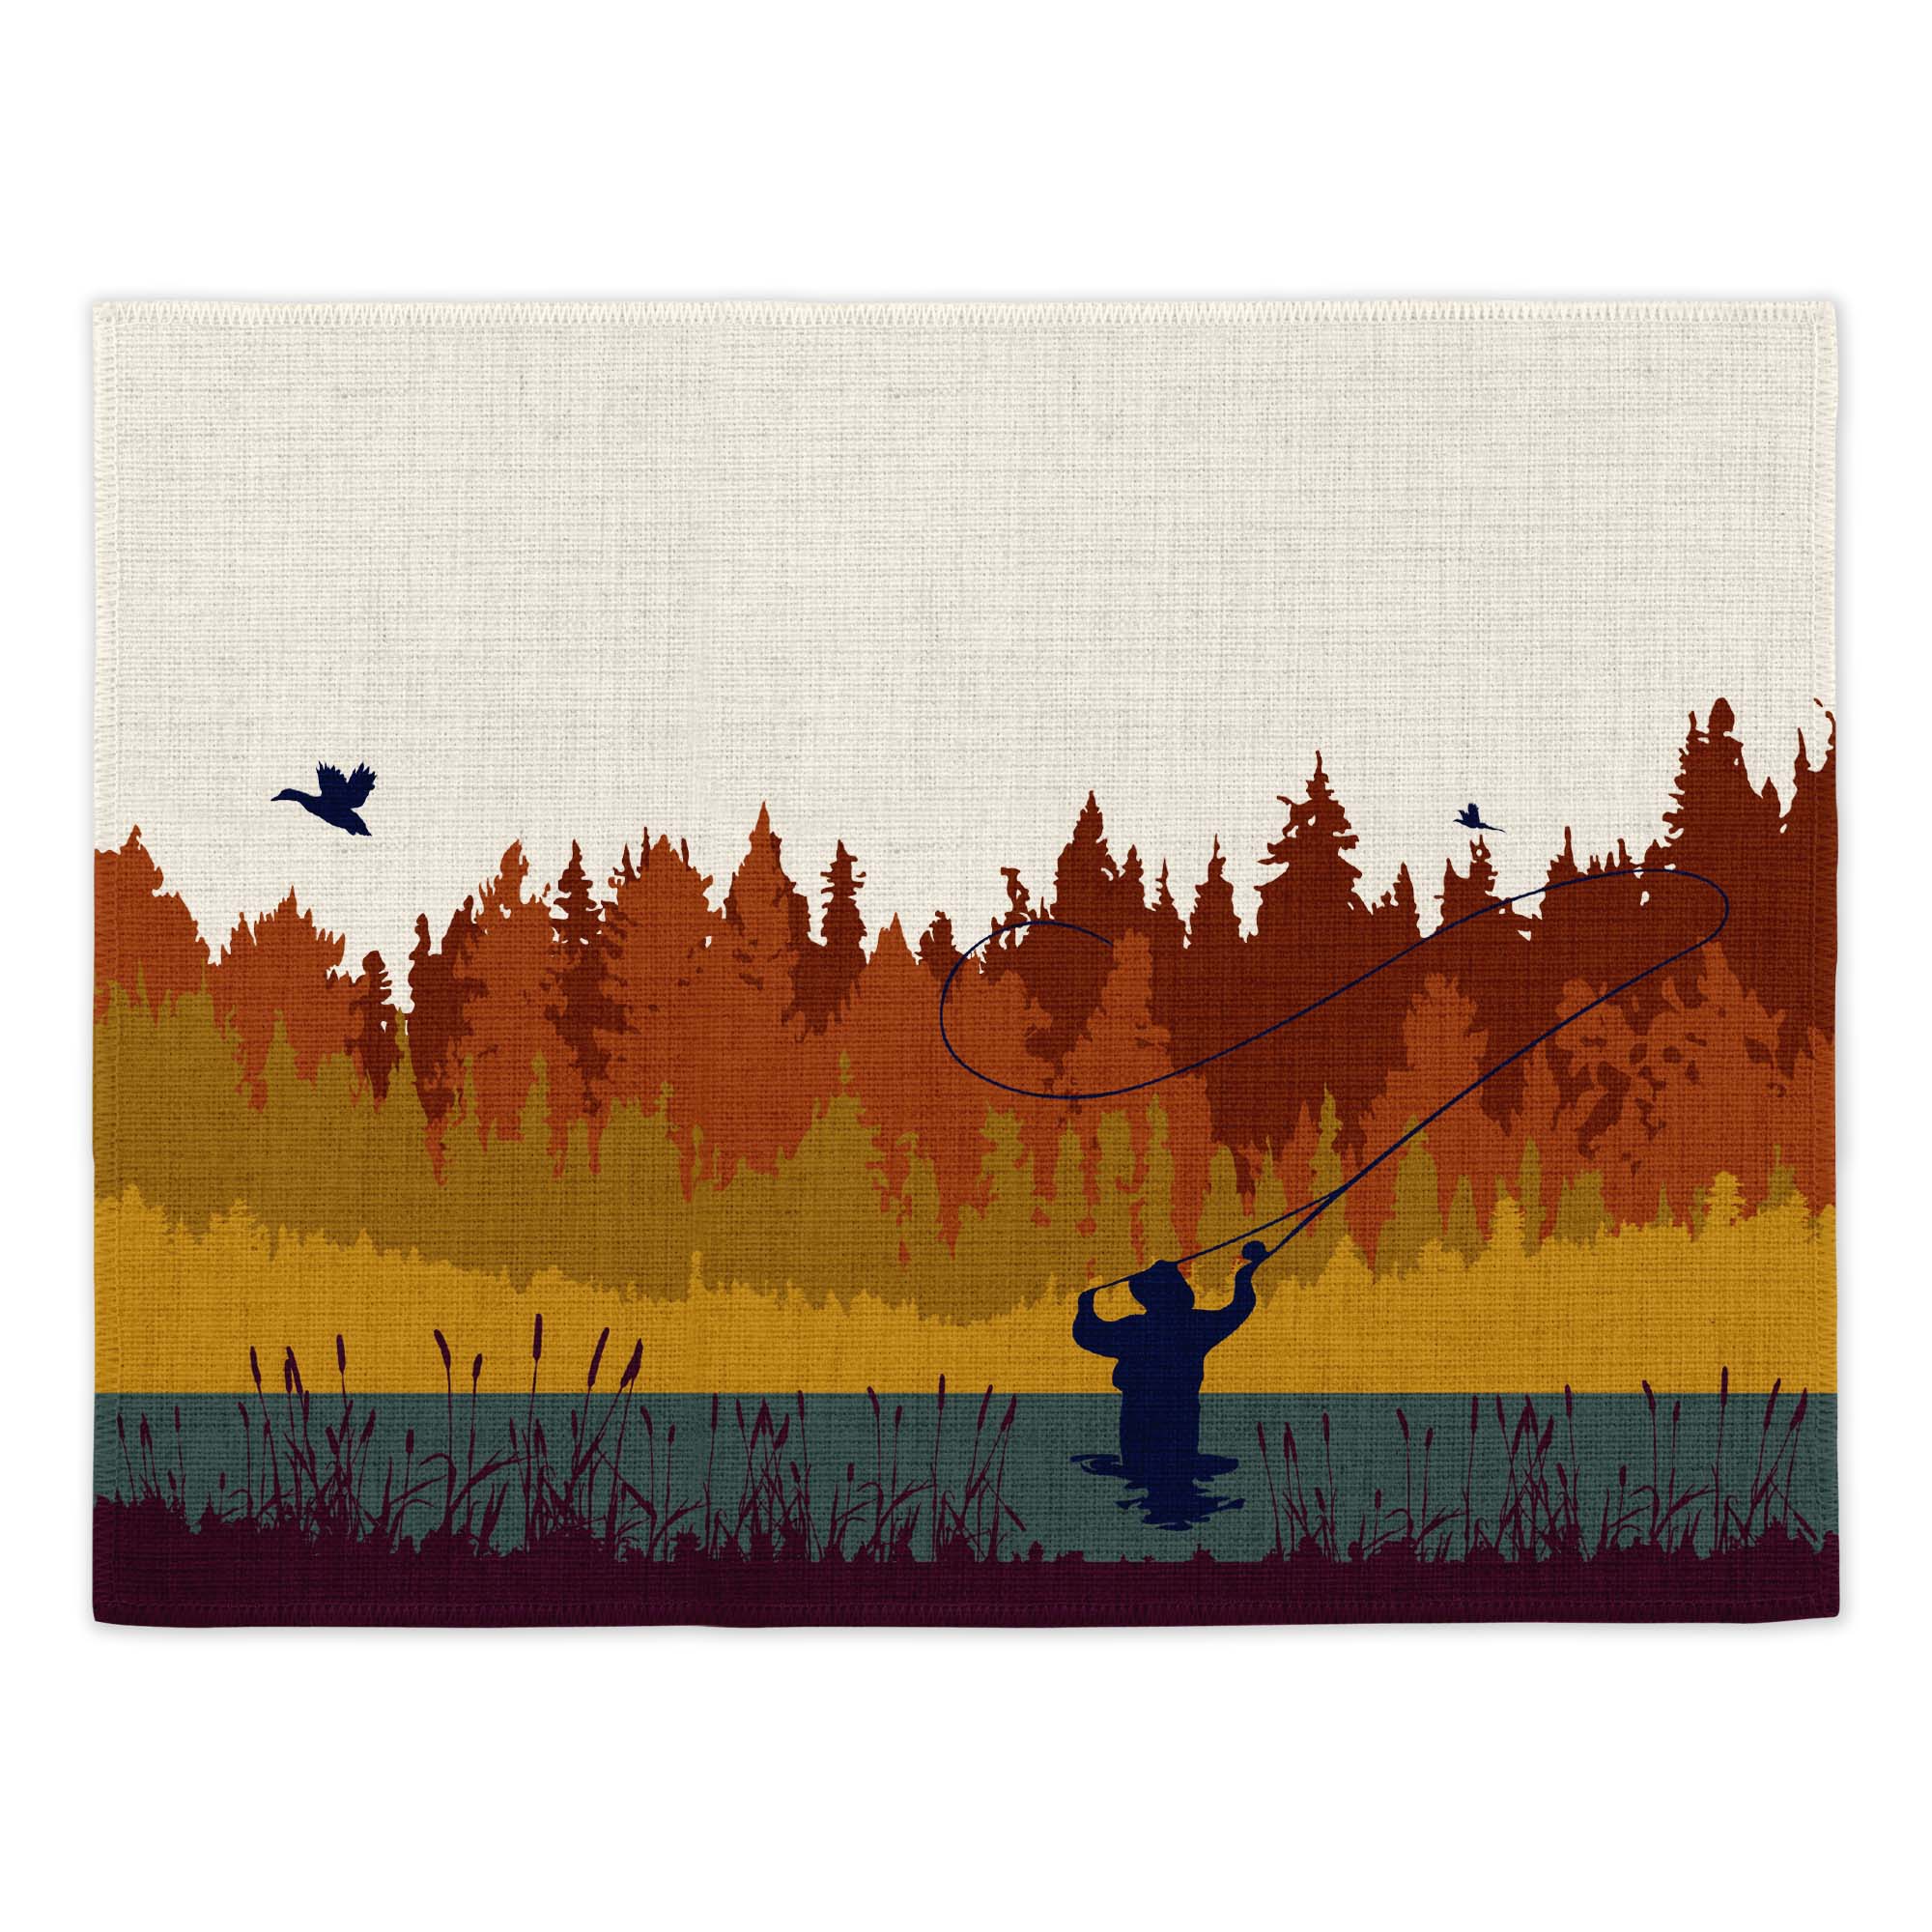 Autumn Fly Fishing Placemats (Set of Four) Placemats Mustard and Gray Ltd Shropshire UK